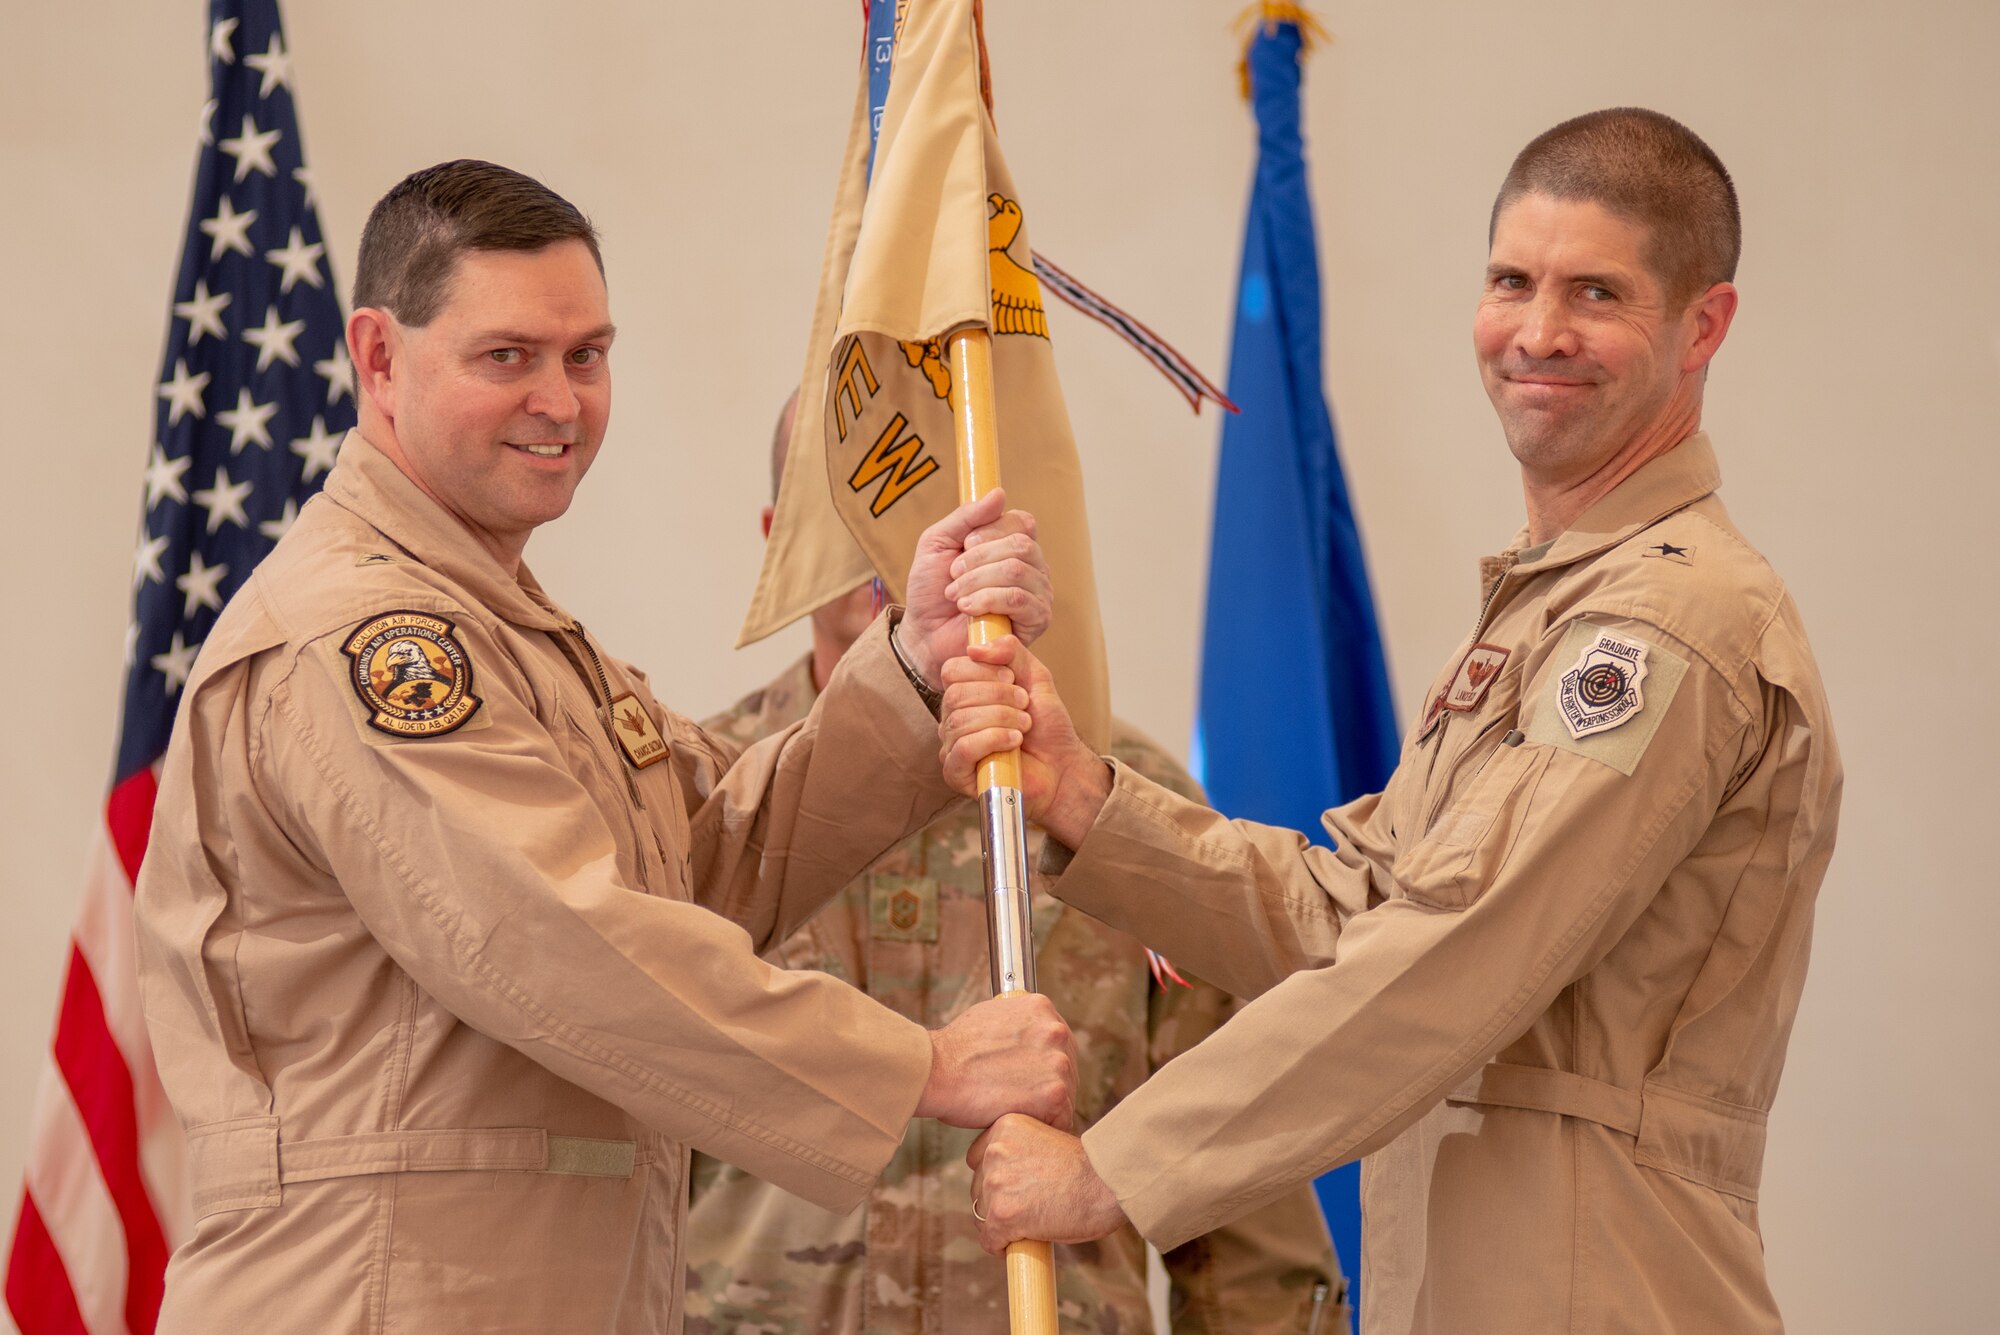 Brig. Gen. Lance Pilch, right, assumes command of the 380th Air Expeditionary Wing during the change of command ceremony July 1, 2019, at Al Dhafra Air Base, United Arab Emirates.